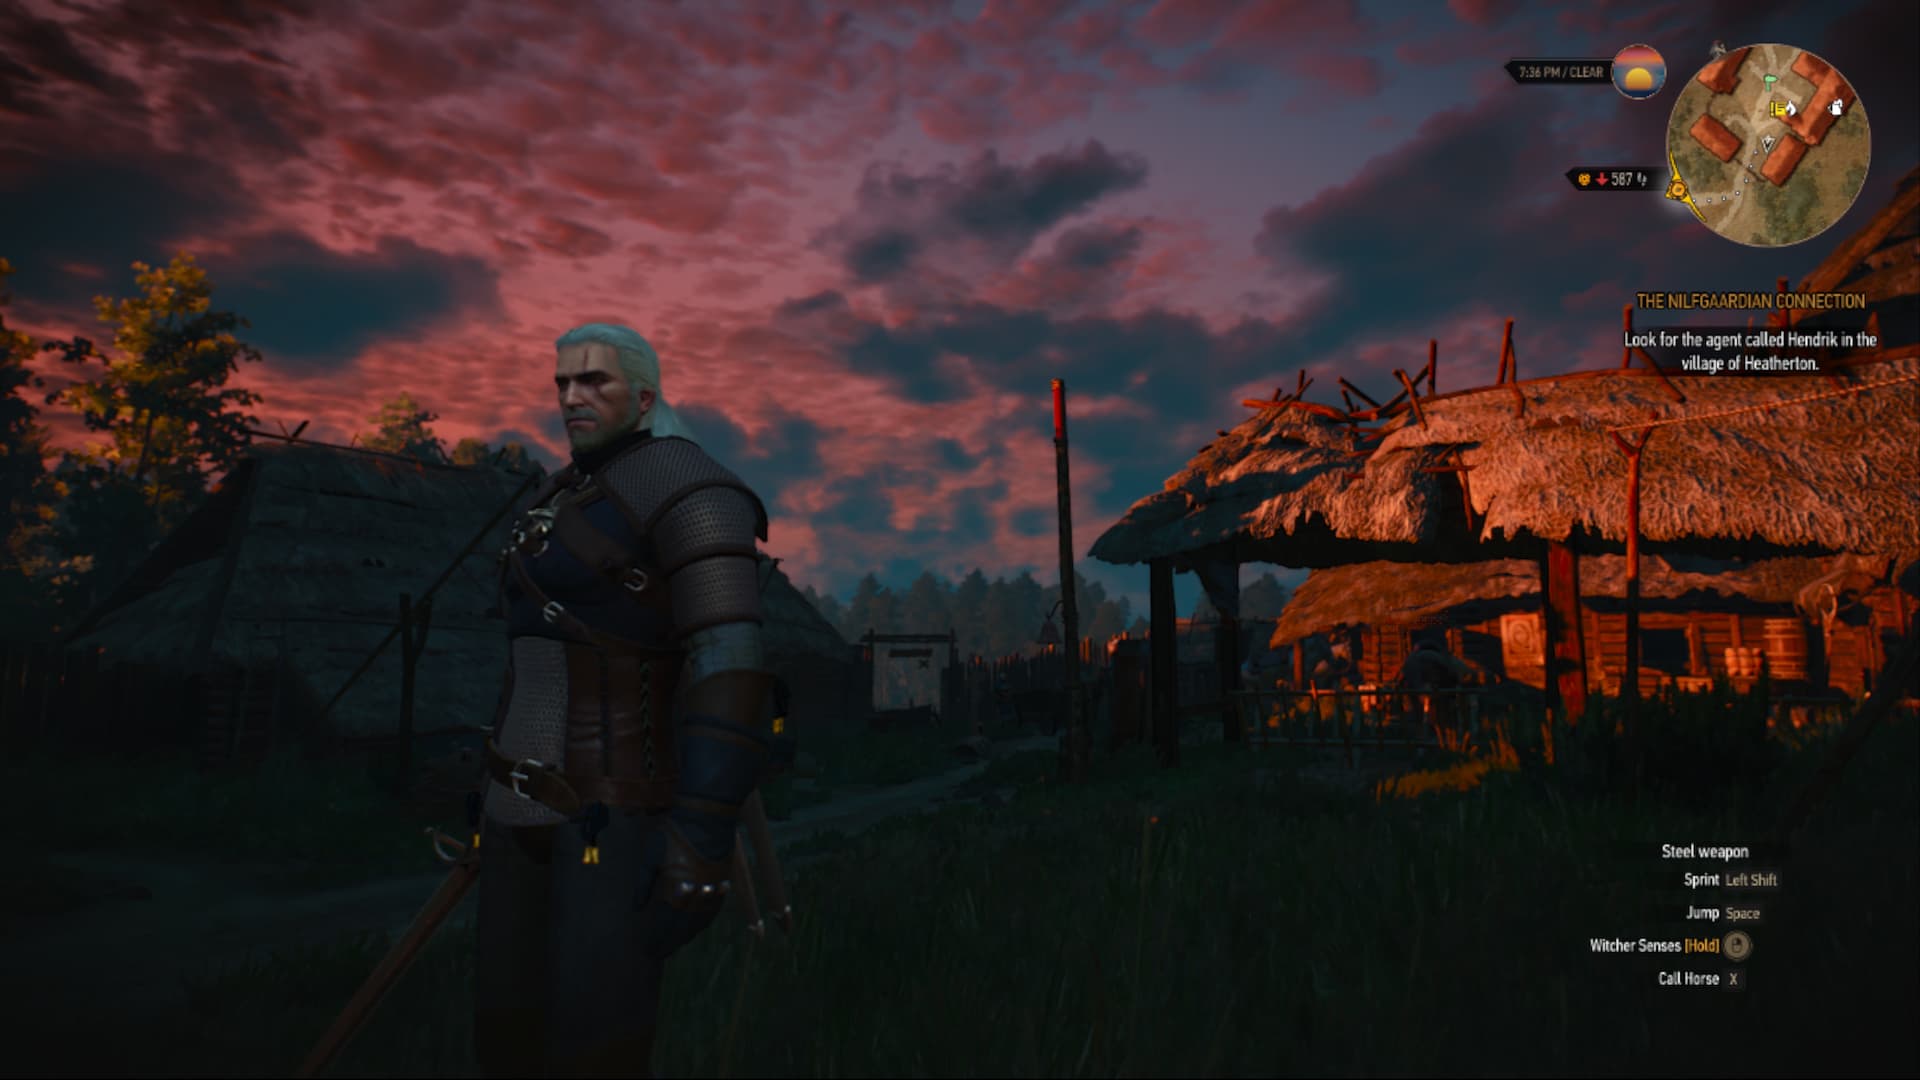 Witcher 3 using Steam gaming on Chromebooks